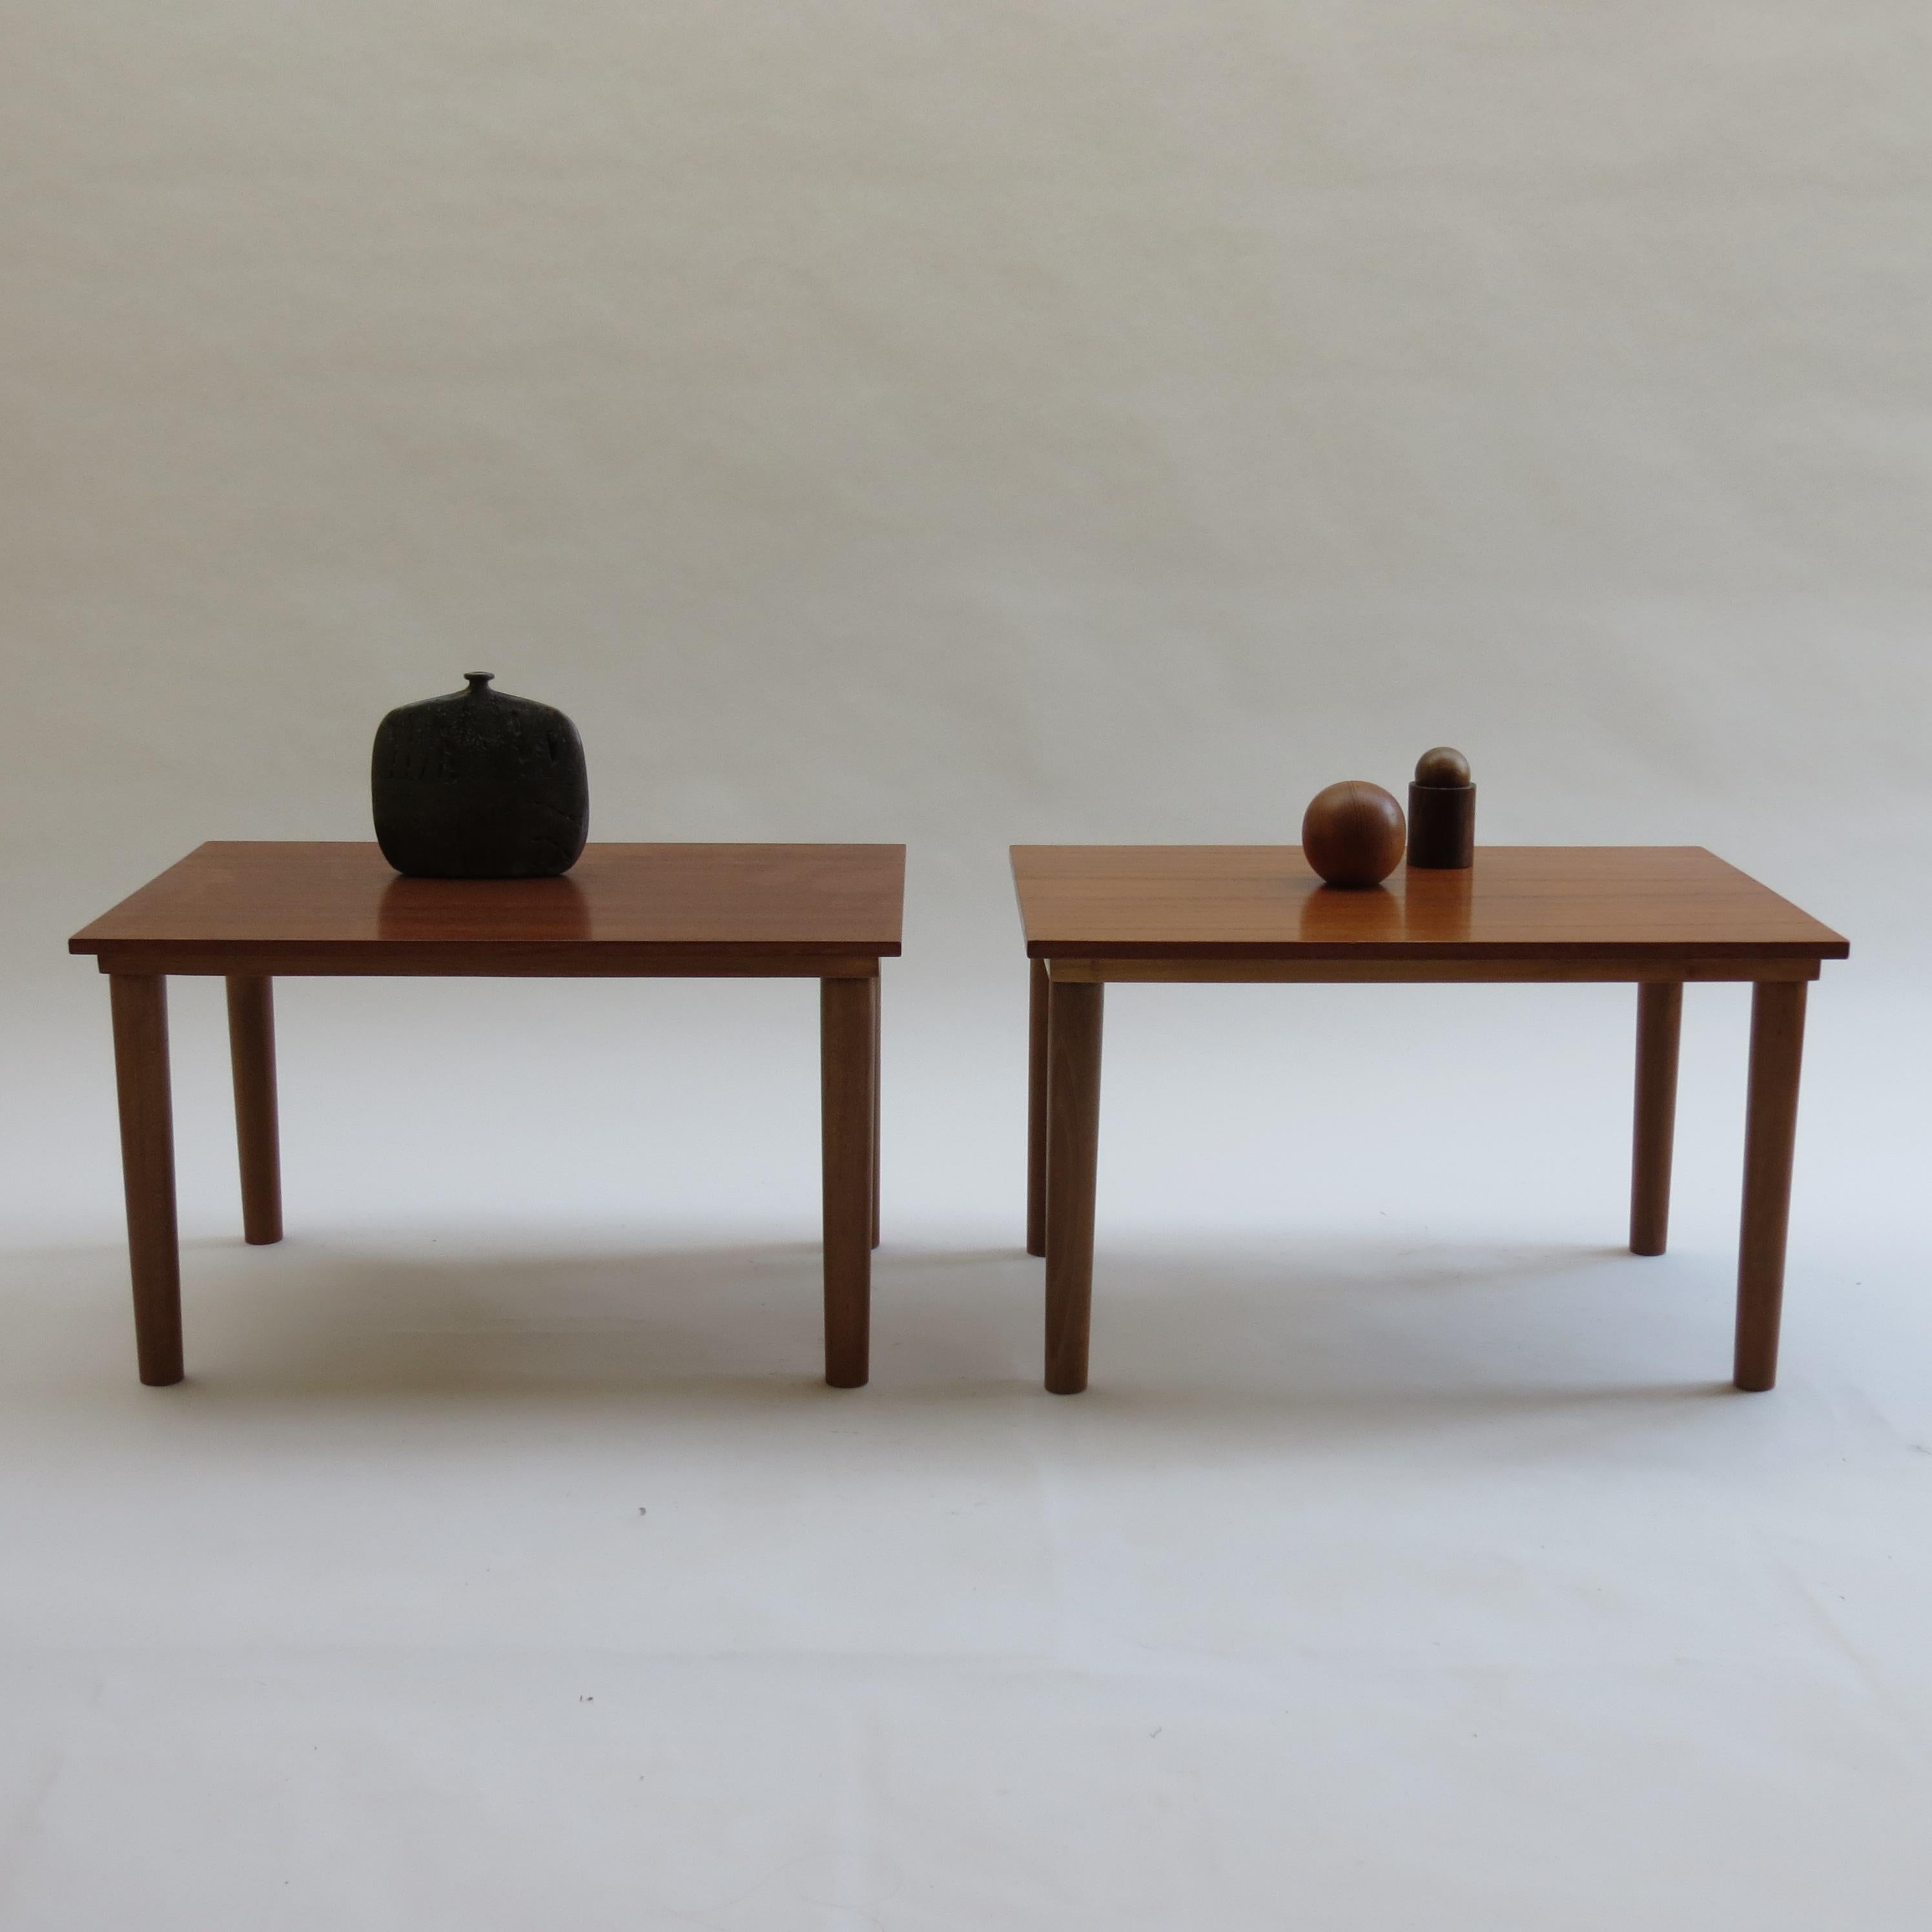 A pair of midcentury side tables in the style of Borge Mogensen. With Teak veneered tops and solid Beech legs. Produced in the 1960s. In good vintage condition.
3 identical sets of pairs of tables are available.

ST1203.